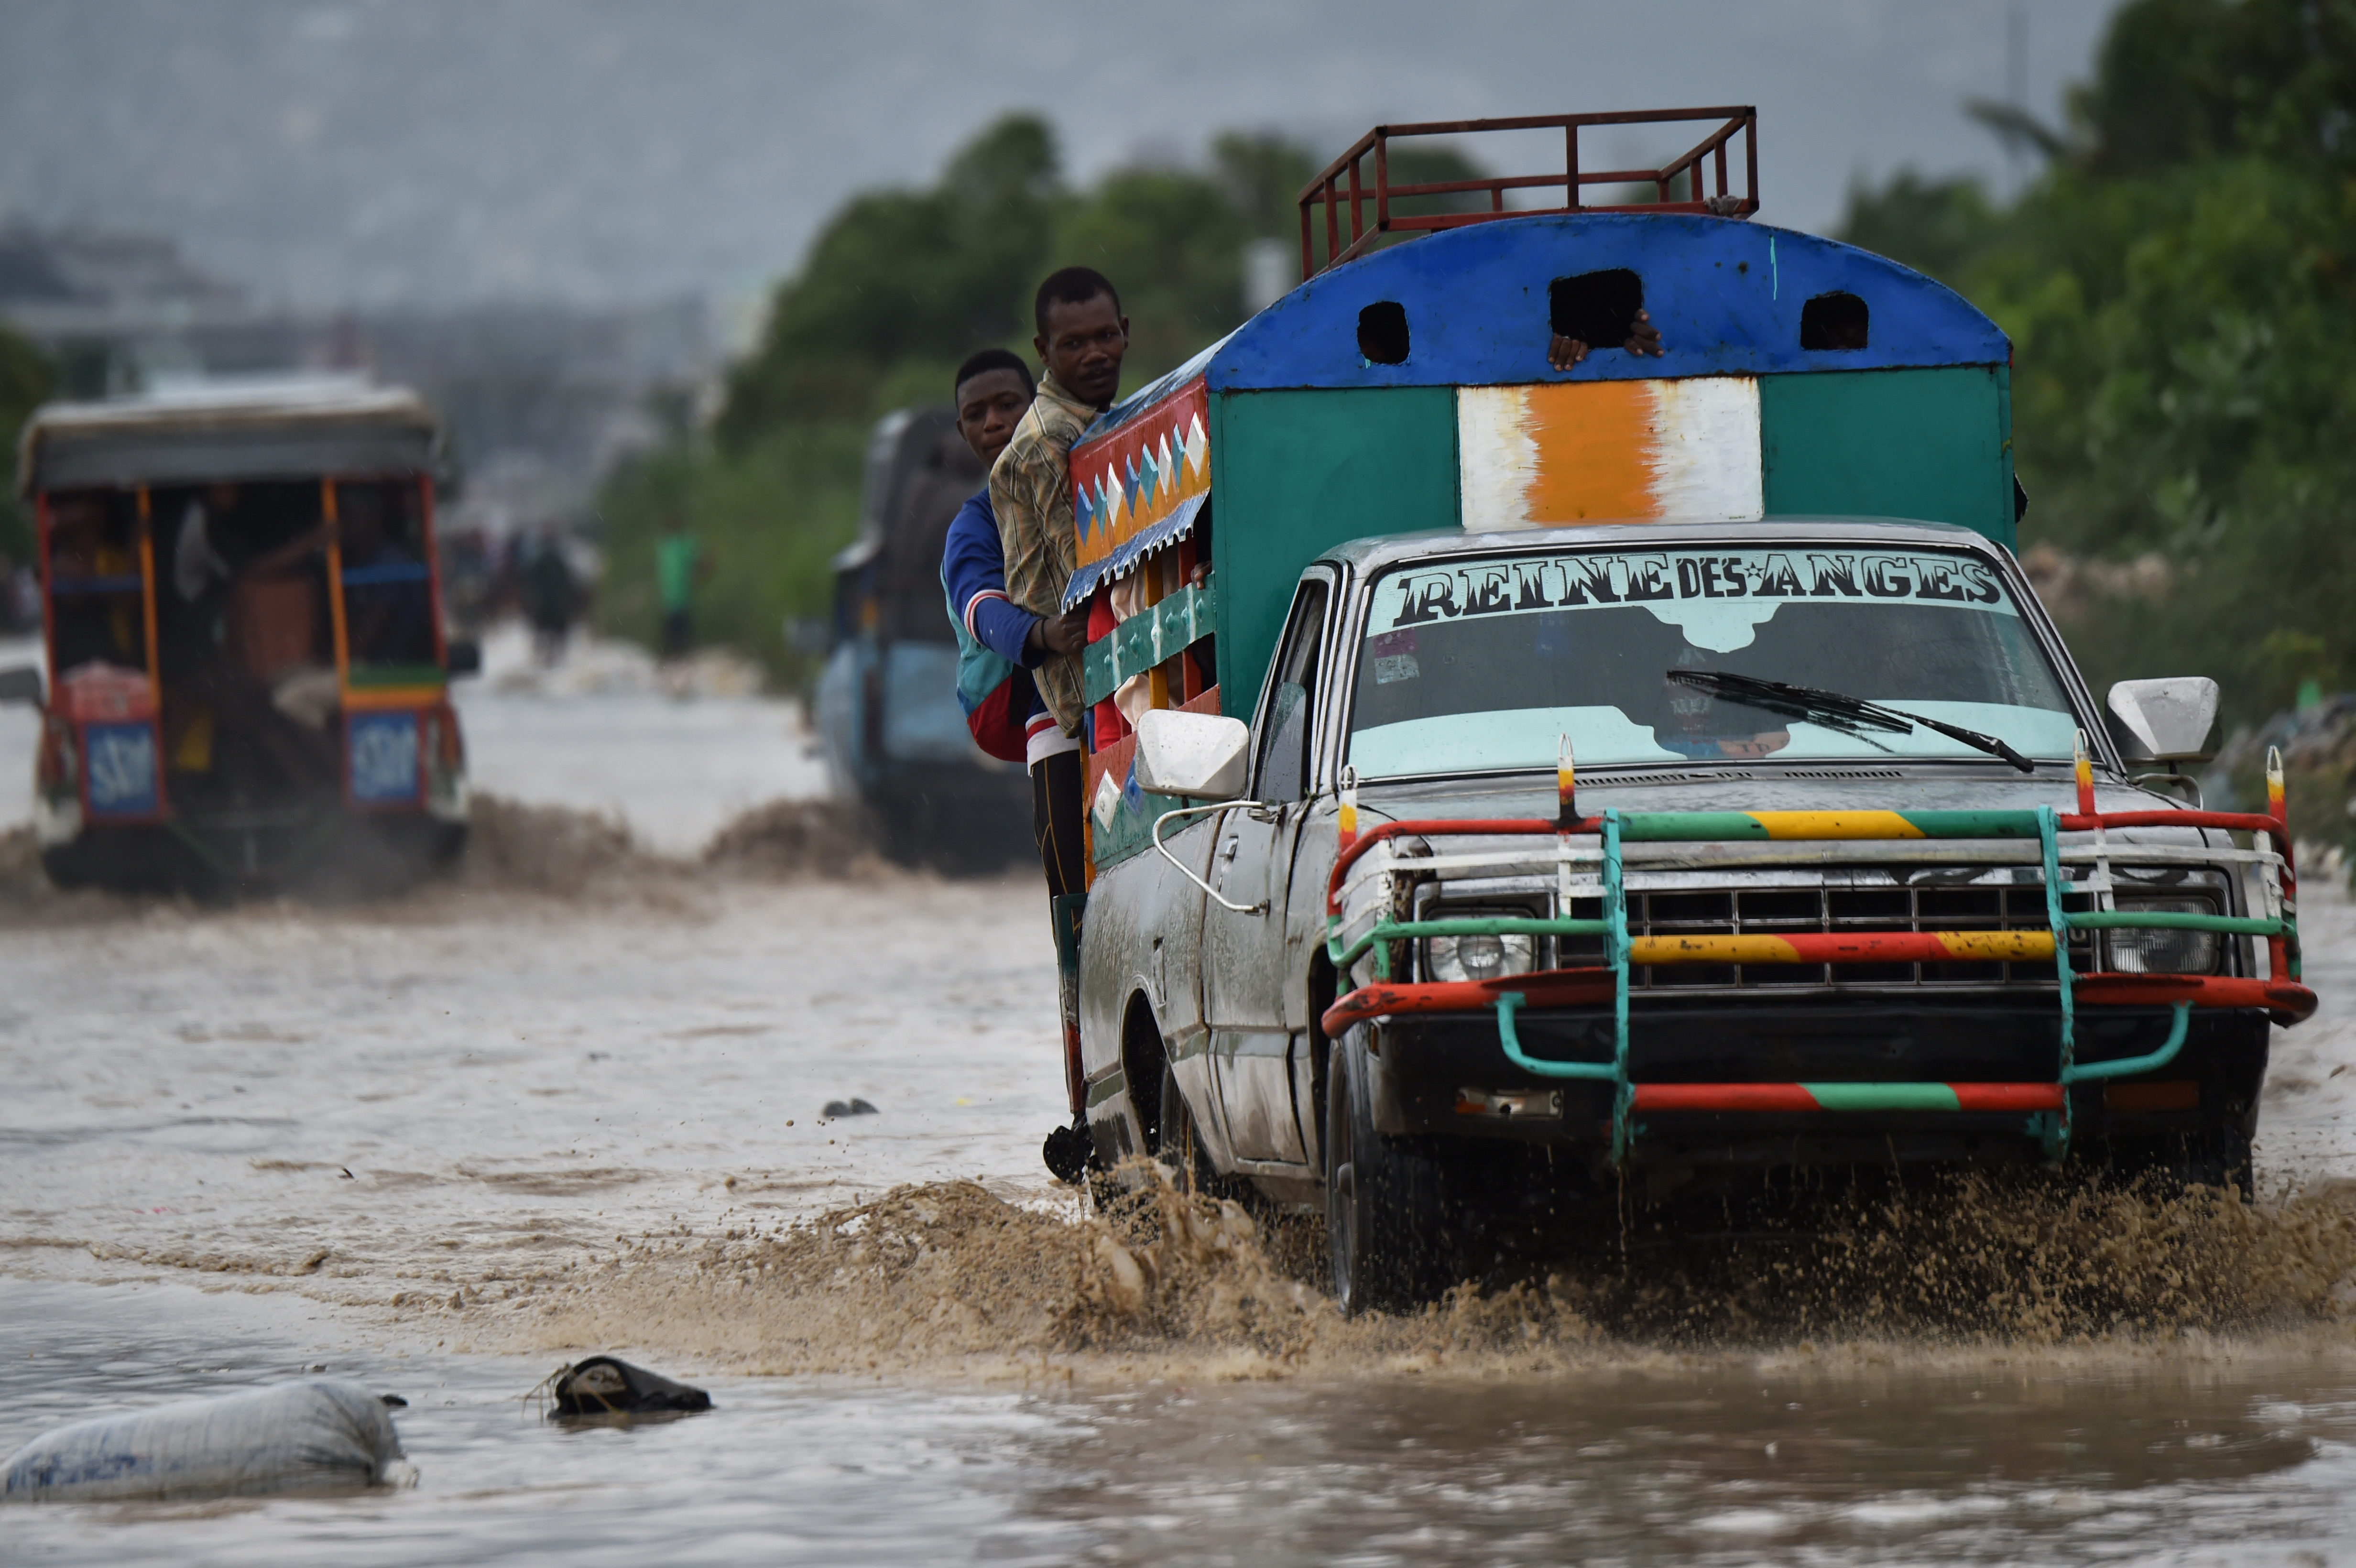 A car makes its way through a flooded street, in a neighbourhood of the commune of Cite Soleil, in the Haitian Capital Port-au-Prince, on October 4, 2016. Hurricane Matthew slammed into Haiti, triggering floods and forcing thousands to flee the path of a storm that has already claimed three lives in the poorest country in the Americas. / AFP PHOTO / HECTOR RETAMAL